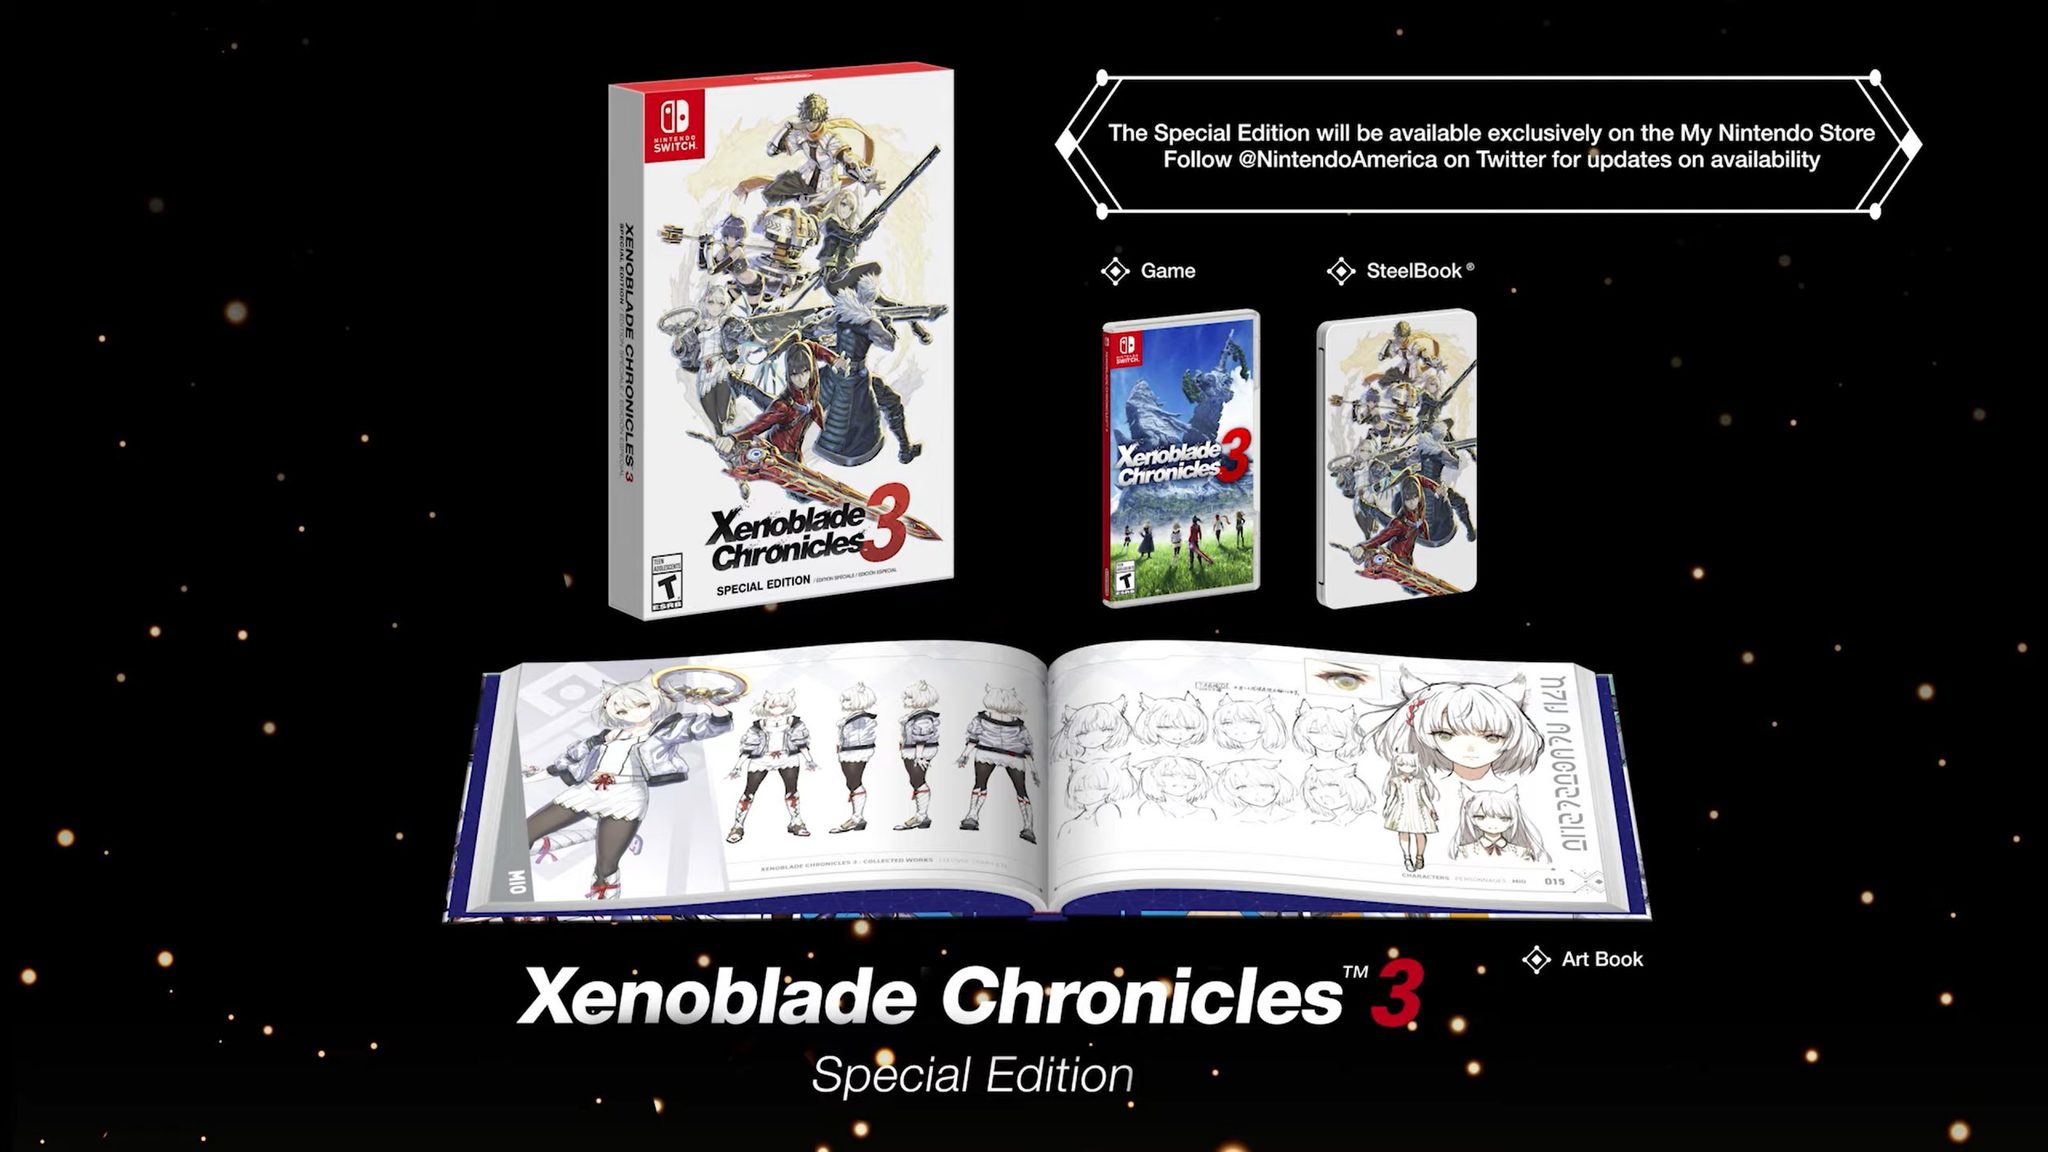 Xenblade Chronicles 3 Special Edition